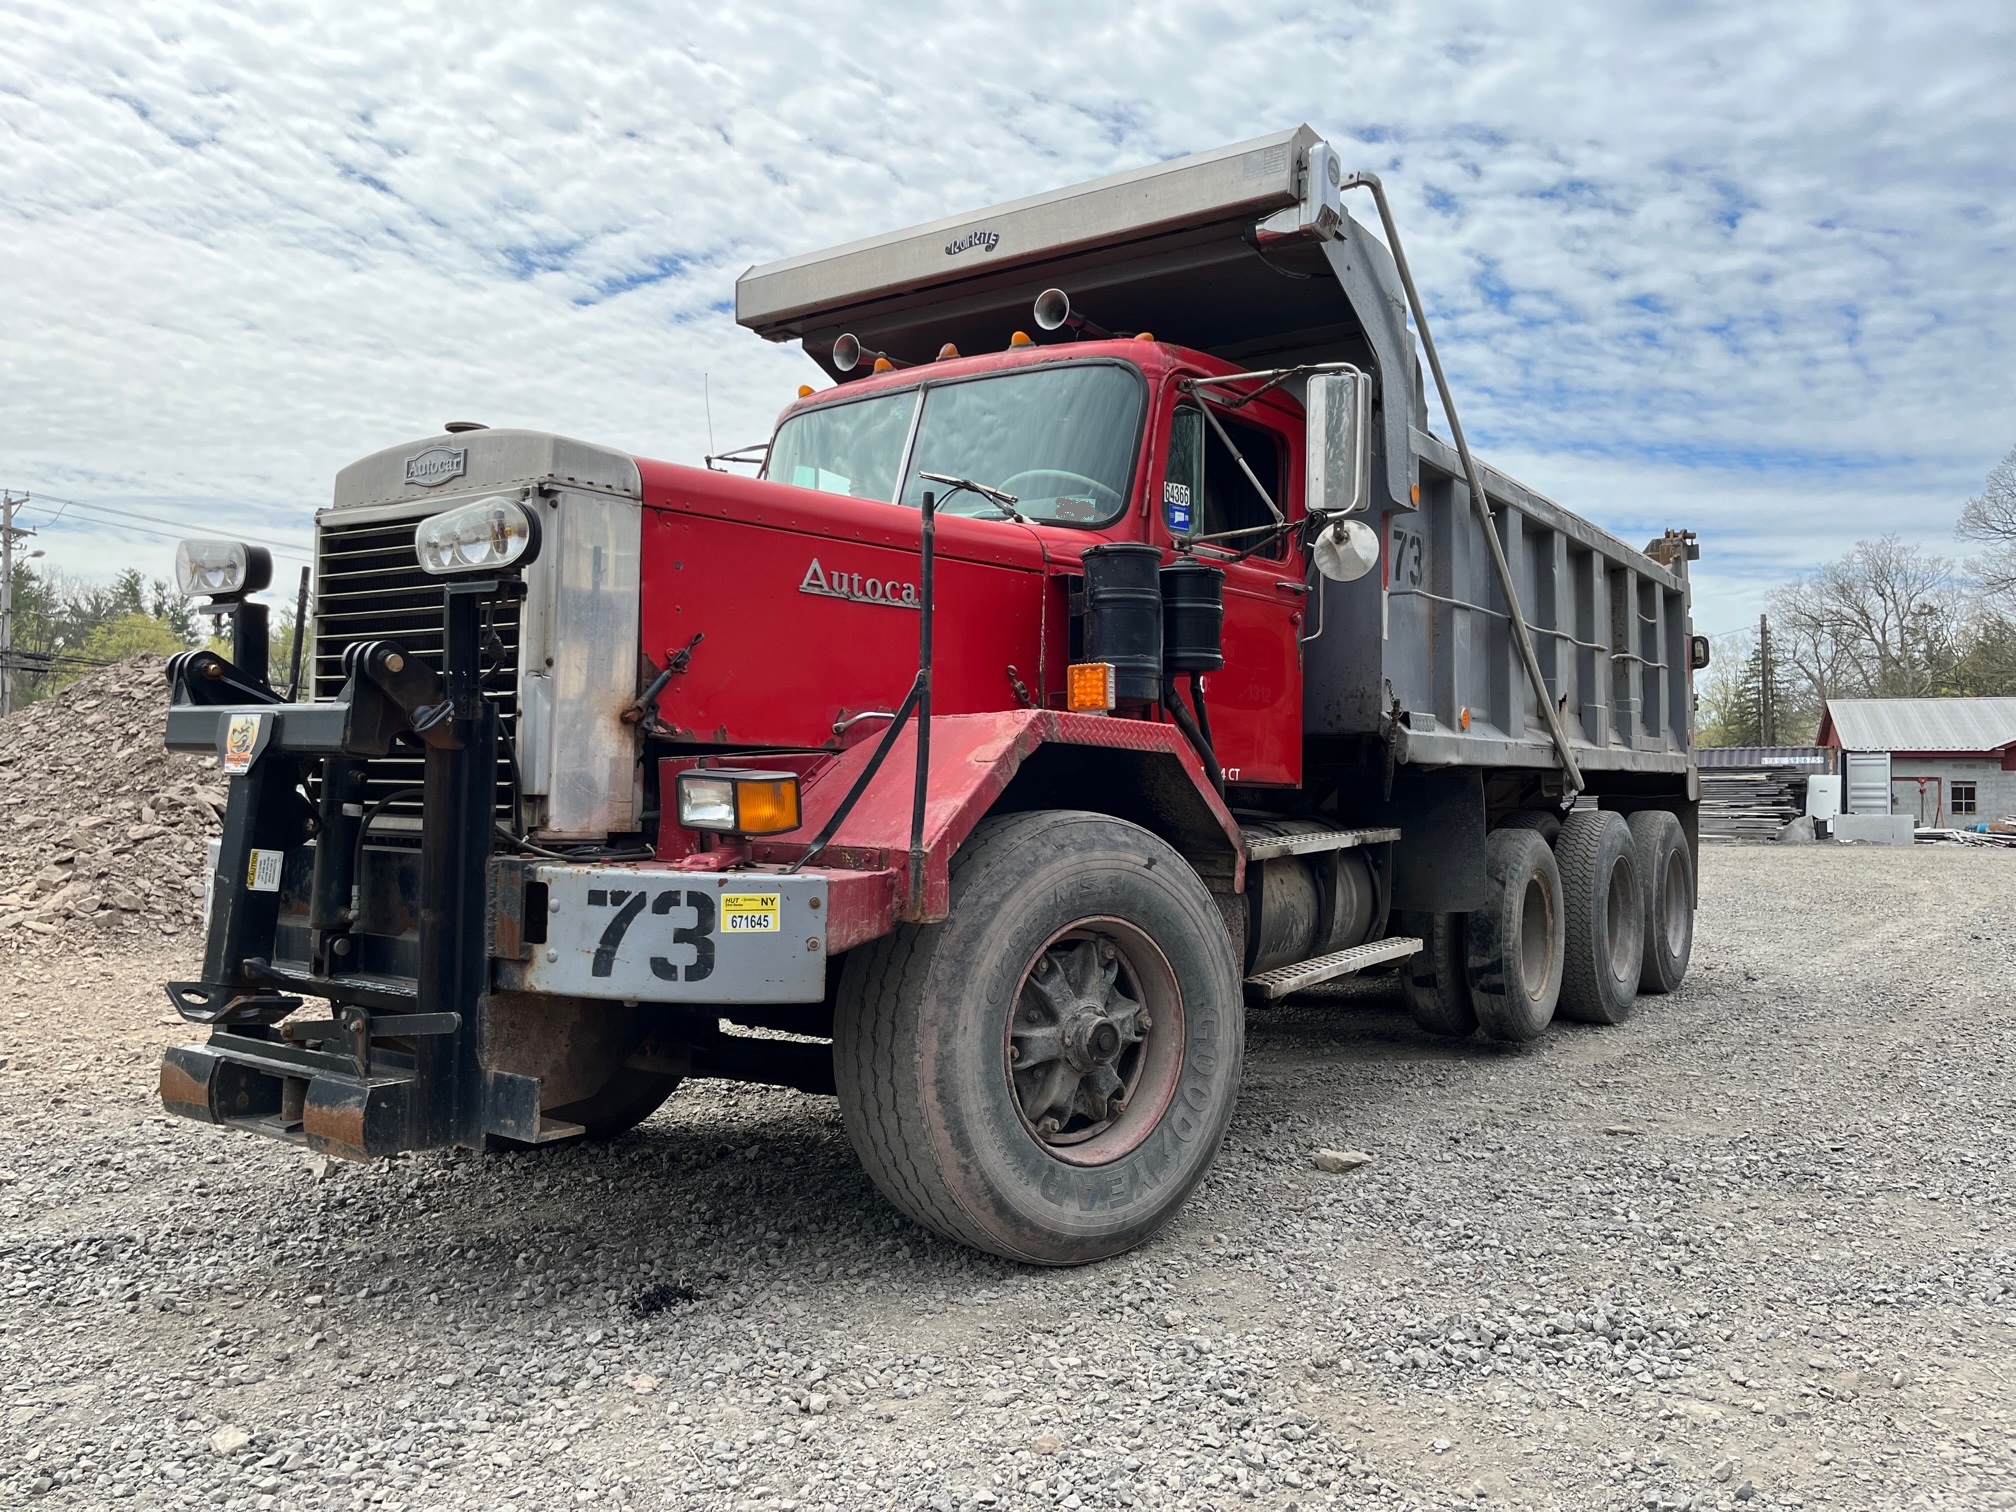 Autocar Tri-axle Dump Truck. 1973 DC Triable model tri-axle with a rebuilt big cam 350 Cummins diesel engine and a rebuilt 8 speed low low transmission. the truck has 20,000 lb. fronts, 58,000 lb. rears and a 65,000 lb. Hendrickson walking beam suspension with walking beams. All bushings are tight. The tires are 24.5 rubber on the rear. It's a full double frame dump truck.